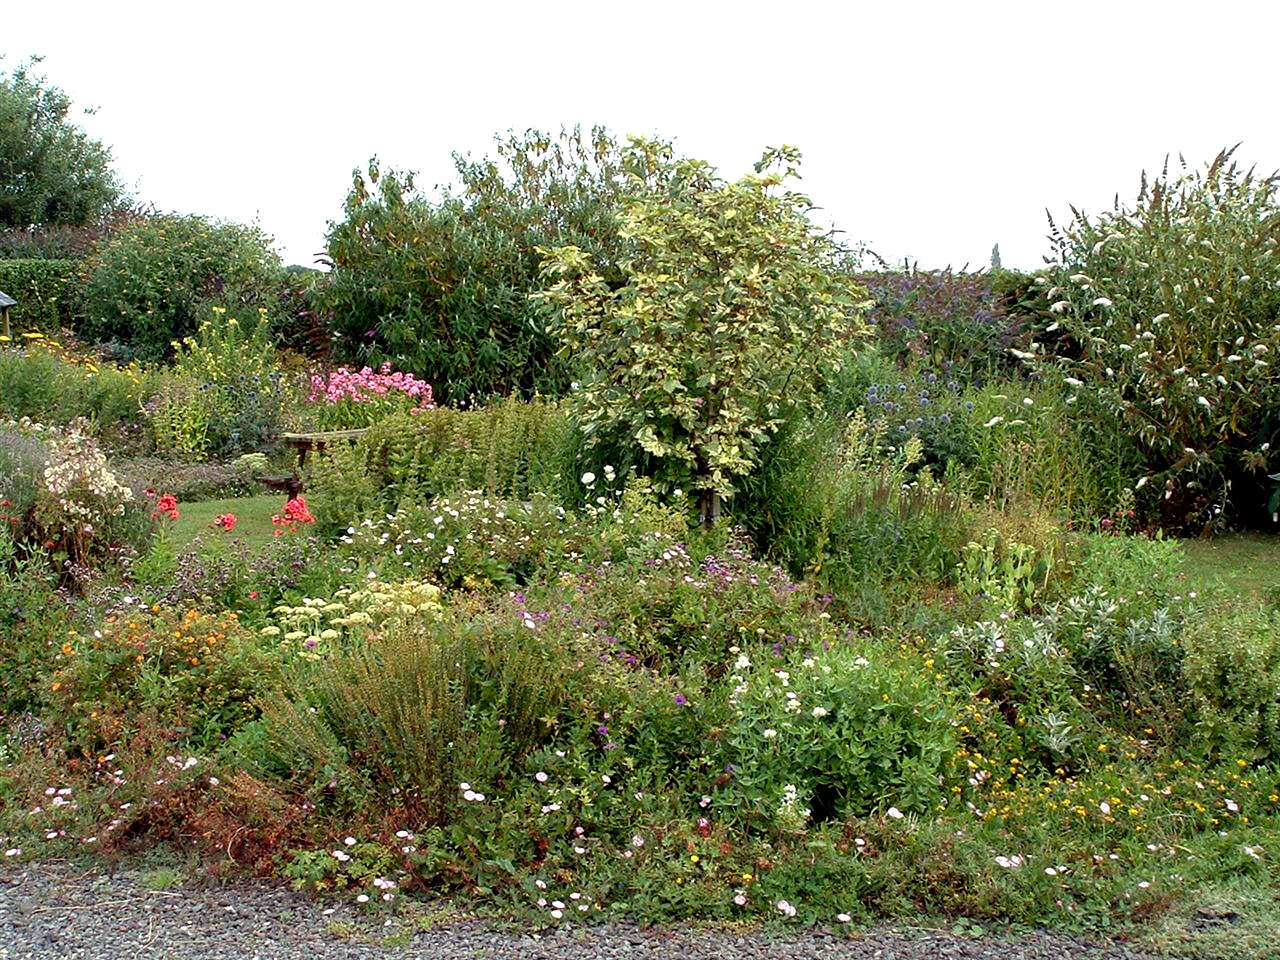 Within a couple of years the cottage garden was a blaze of colour and nectar.